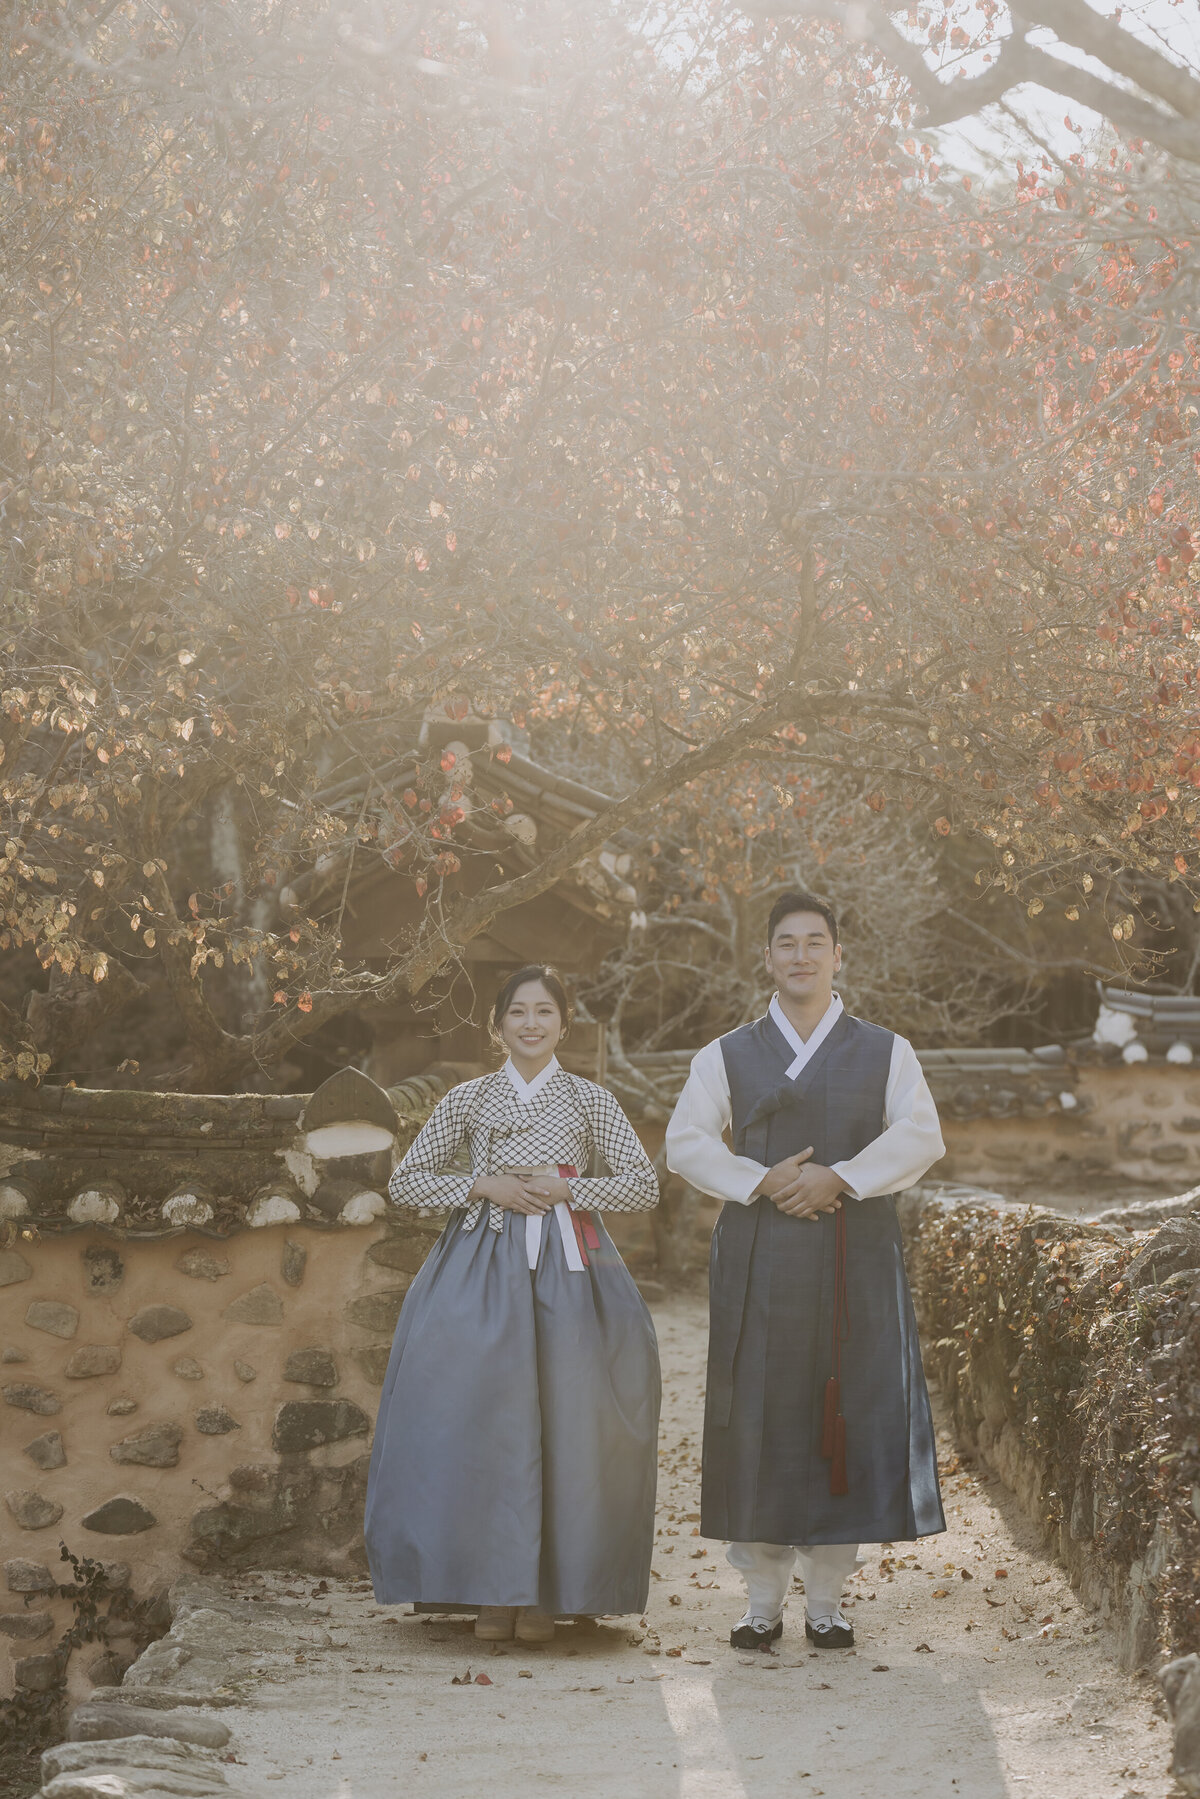 the couple wearing their blue hanbok standing in a respectful manner putting their hands at their stomach